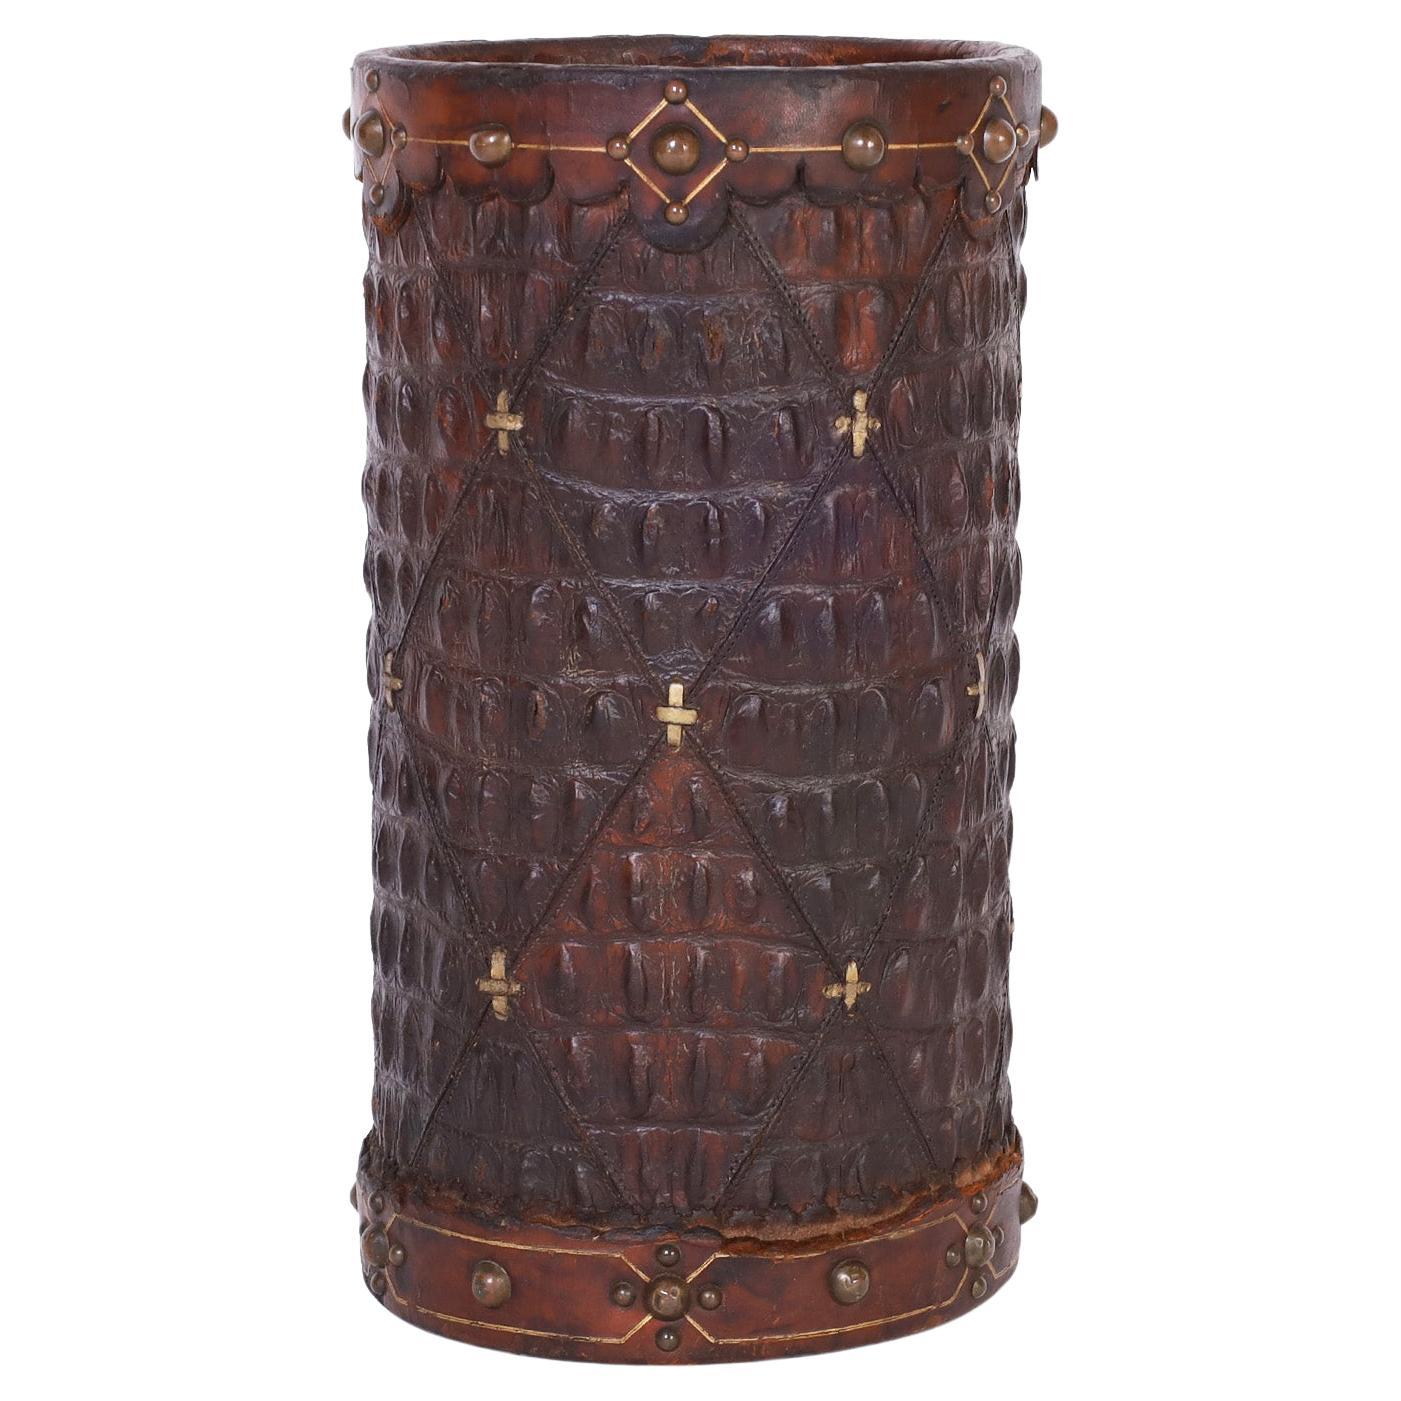 French Alligator Bin or Canister